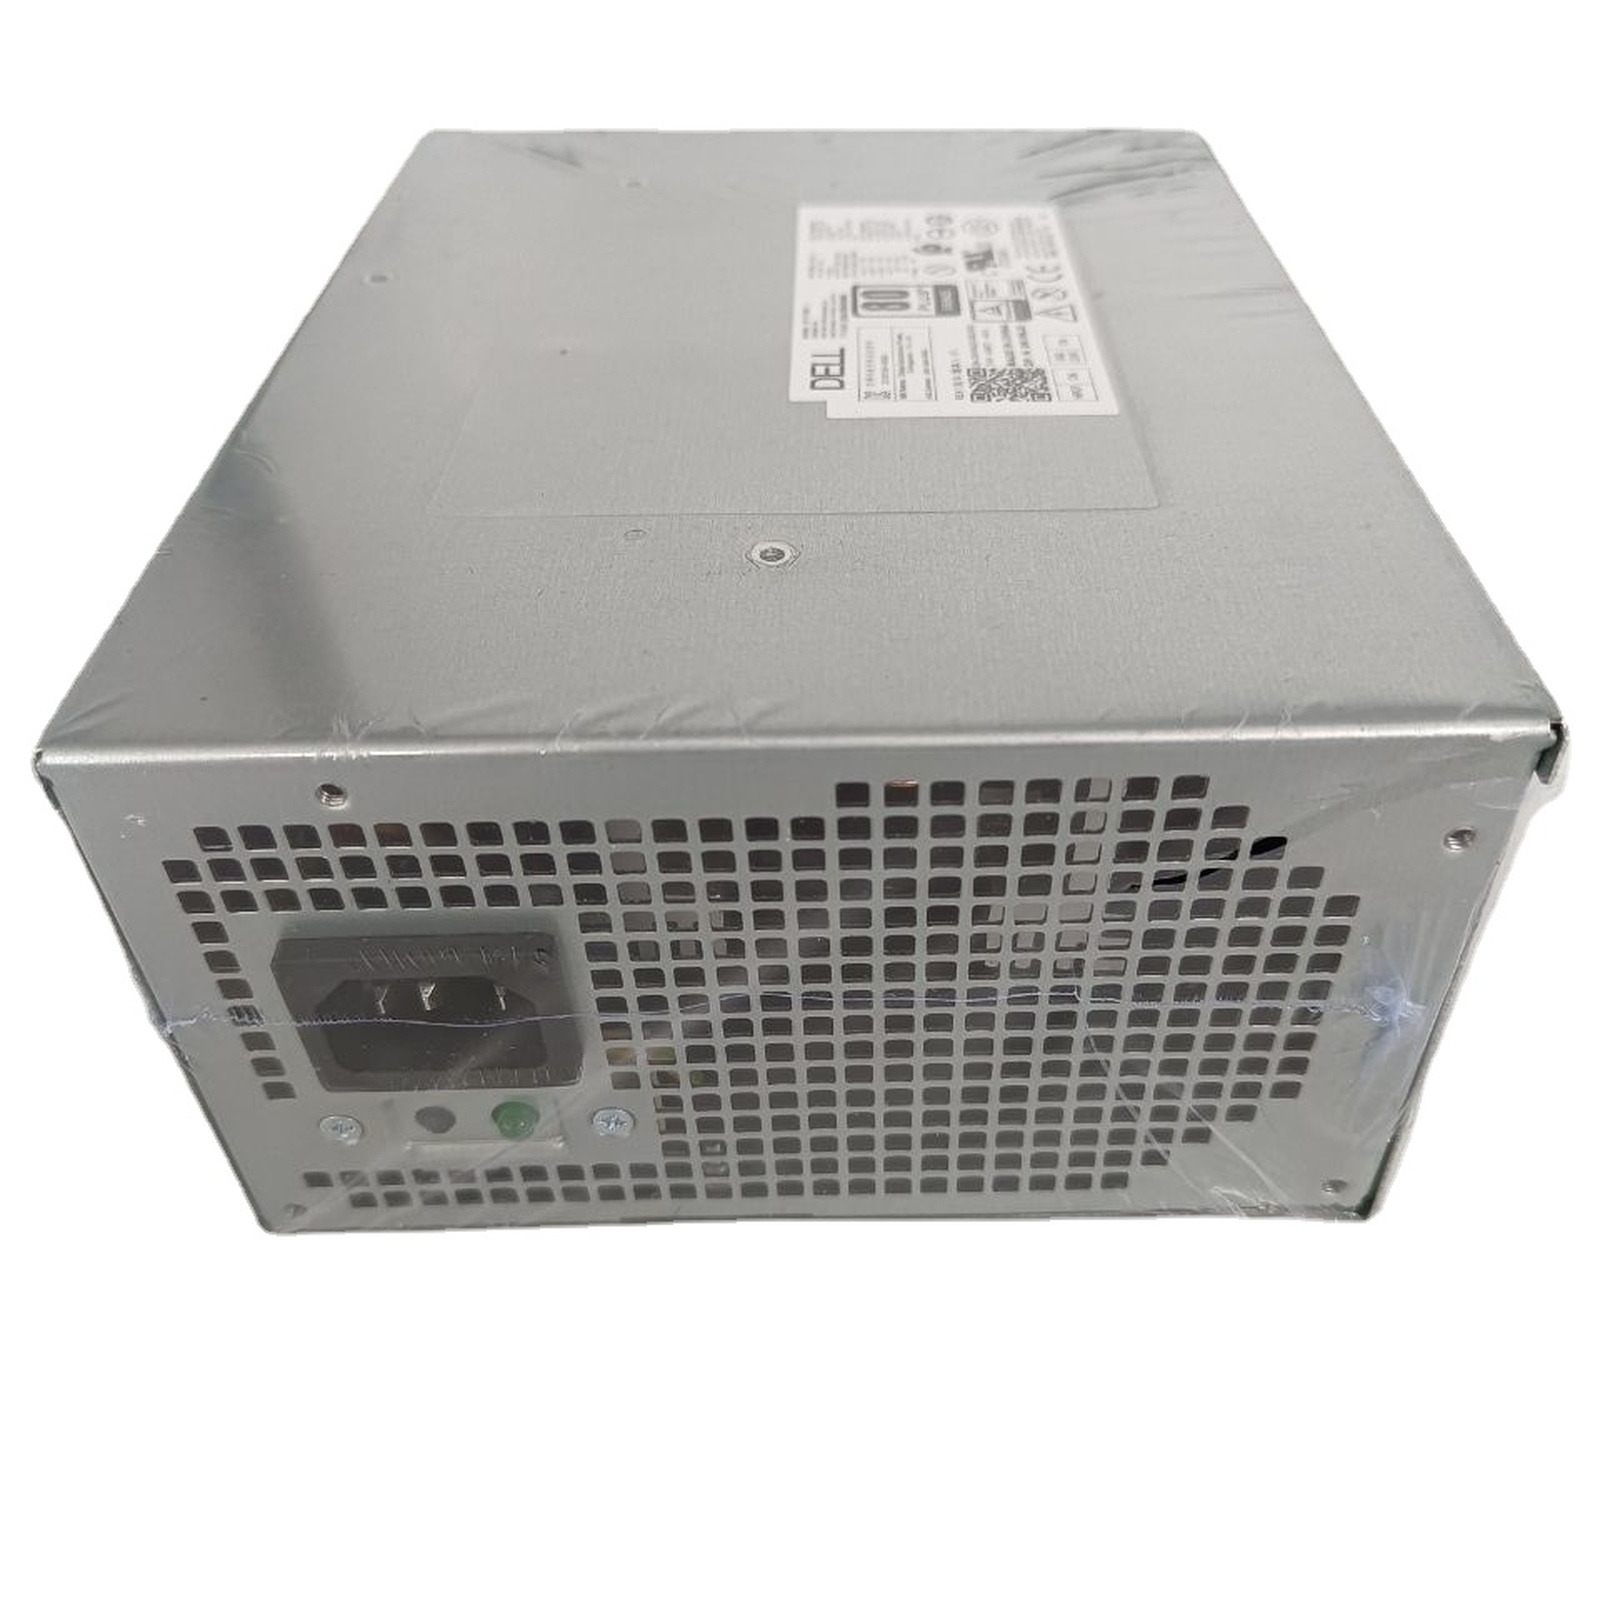 New 850W Power Supply For Dell D850EF-00 Power Supply Module 850W